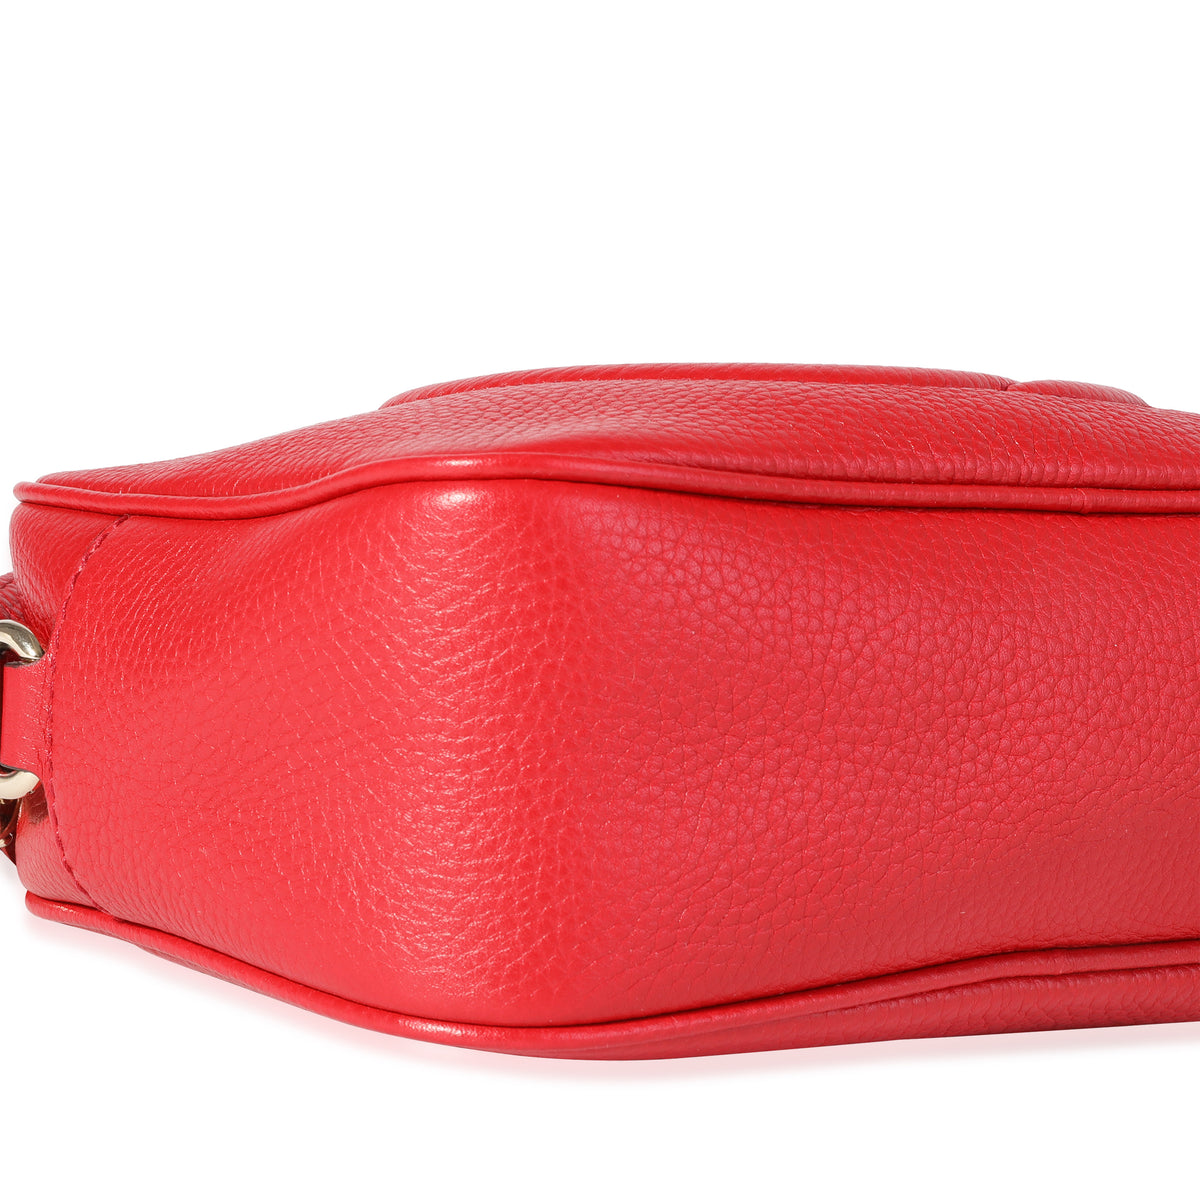 Gucci Red Pebbled Leather Soho Disco Crossbody